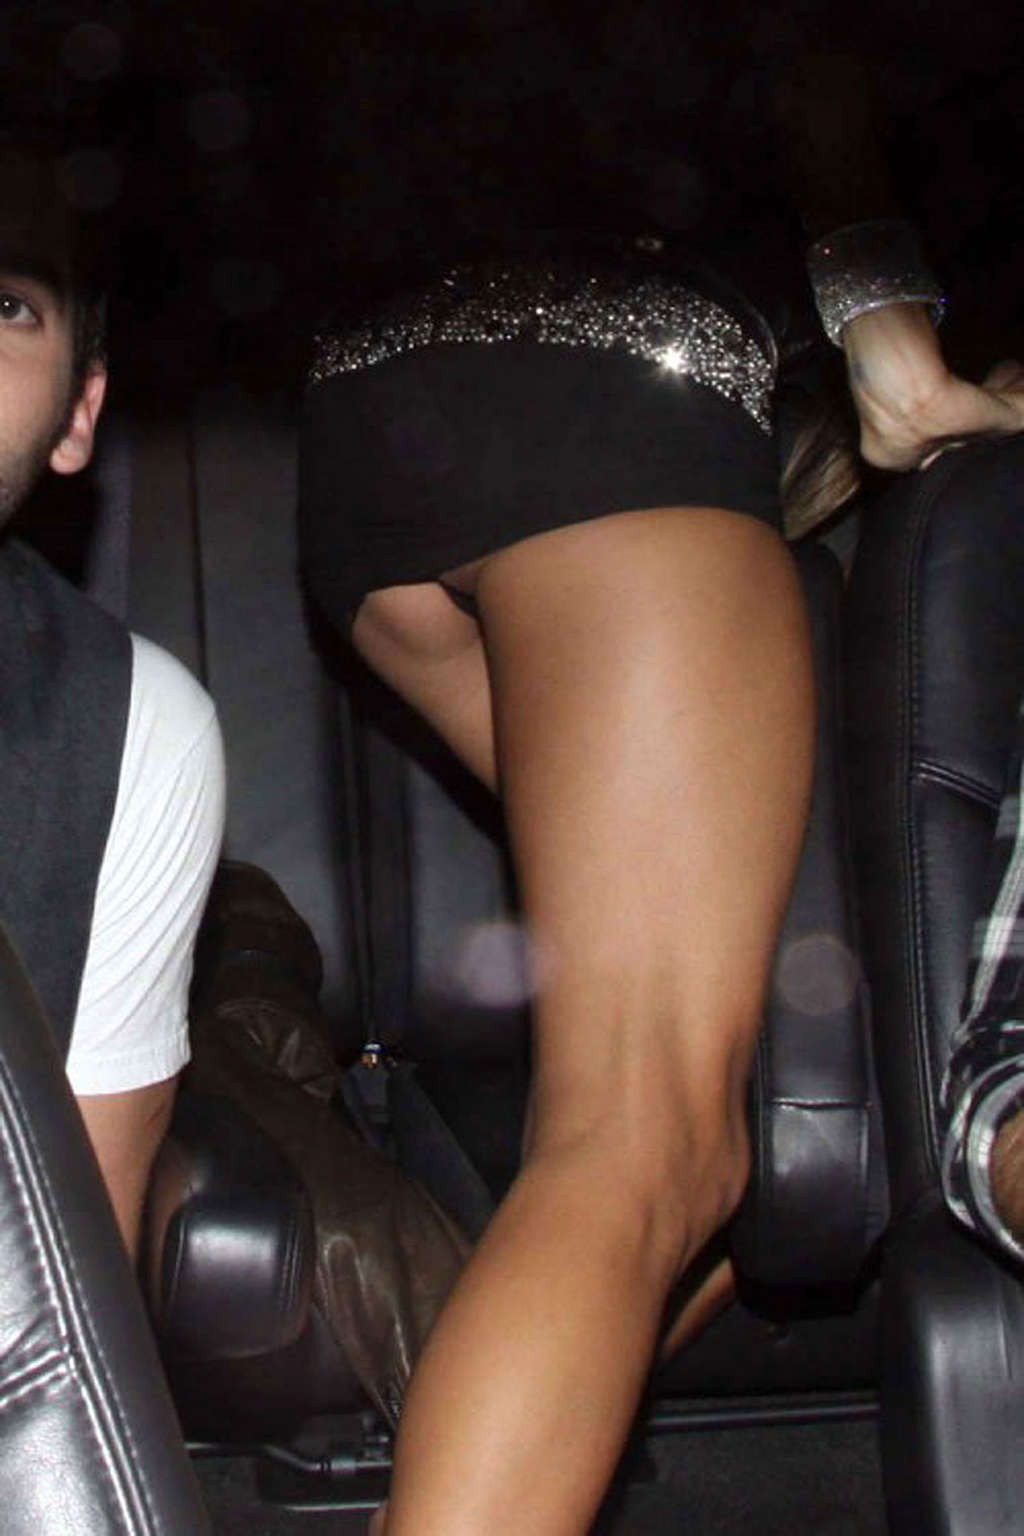 Alessandra Ambrosio posing with roller blades and upskirt in car #75363376